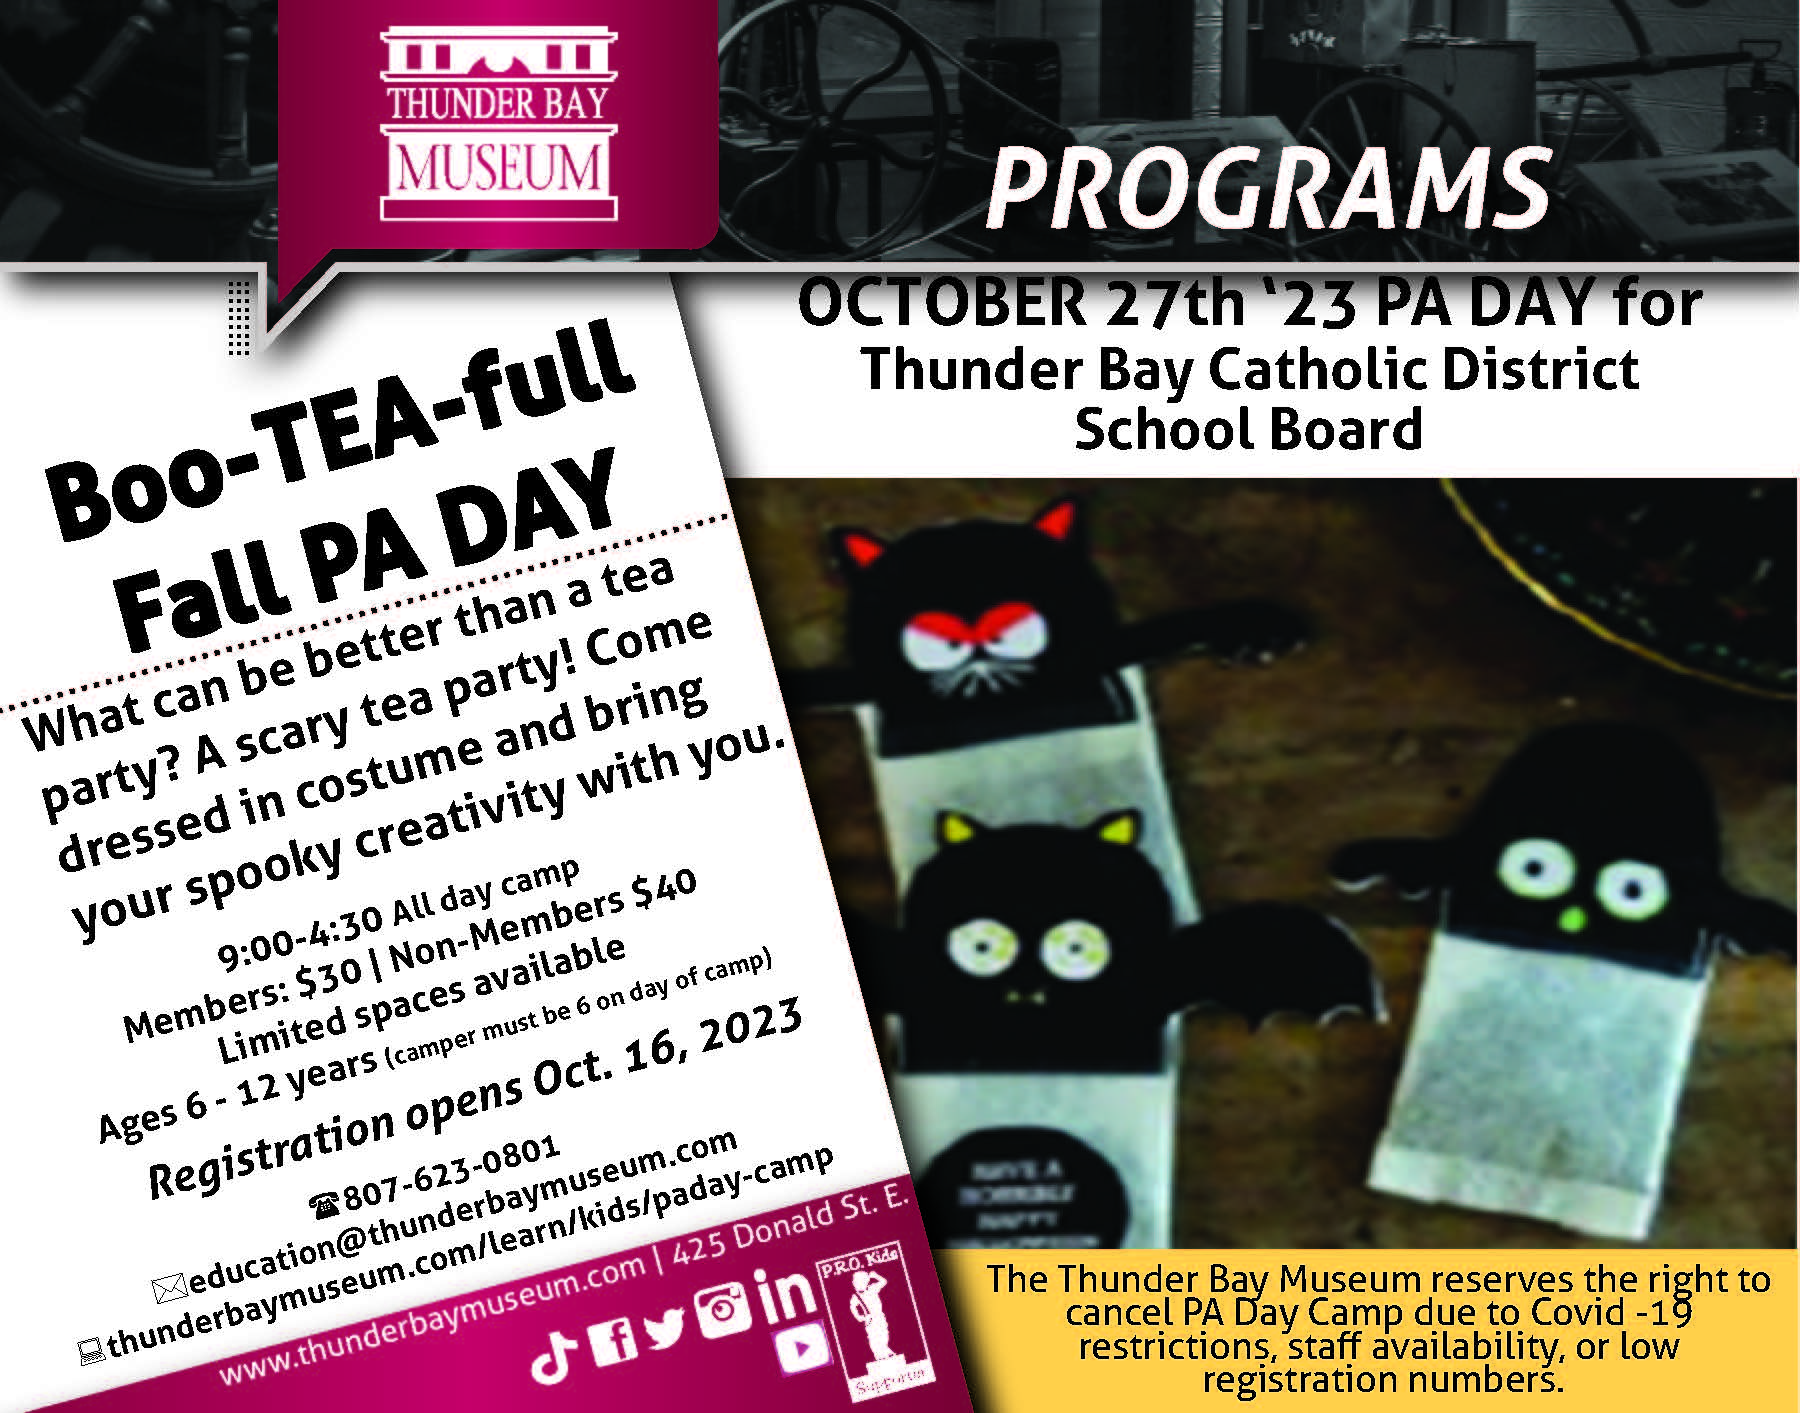 PA Day Camp At the Thunder Bay Museum – Boo-TEA-full Fall Thunder Bay Catholic District School Board